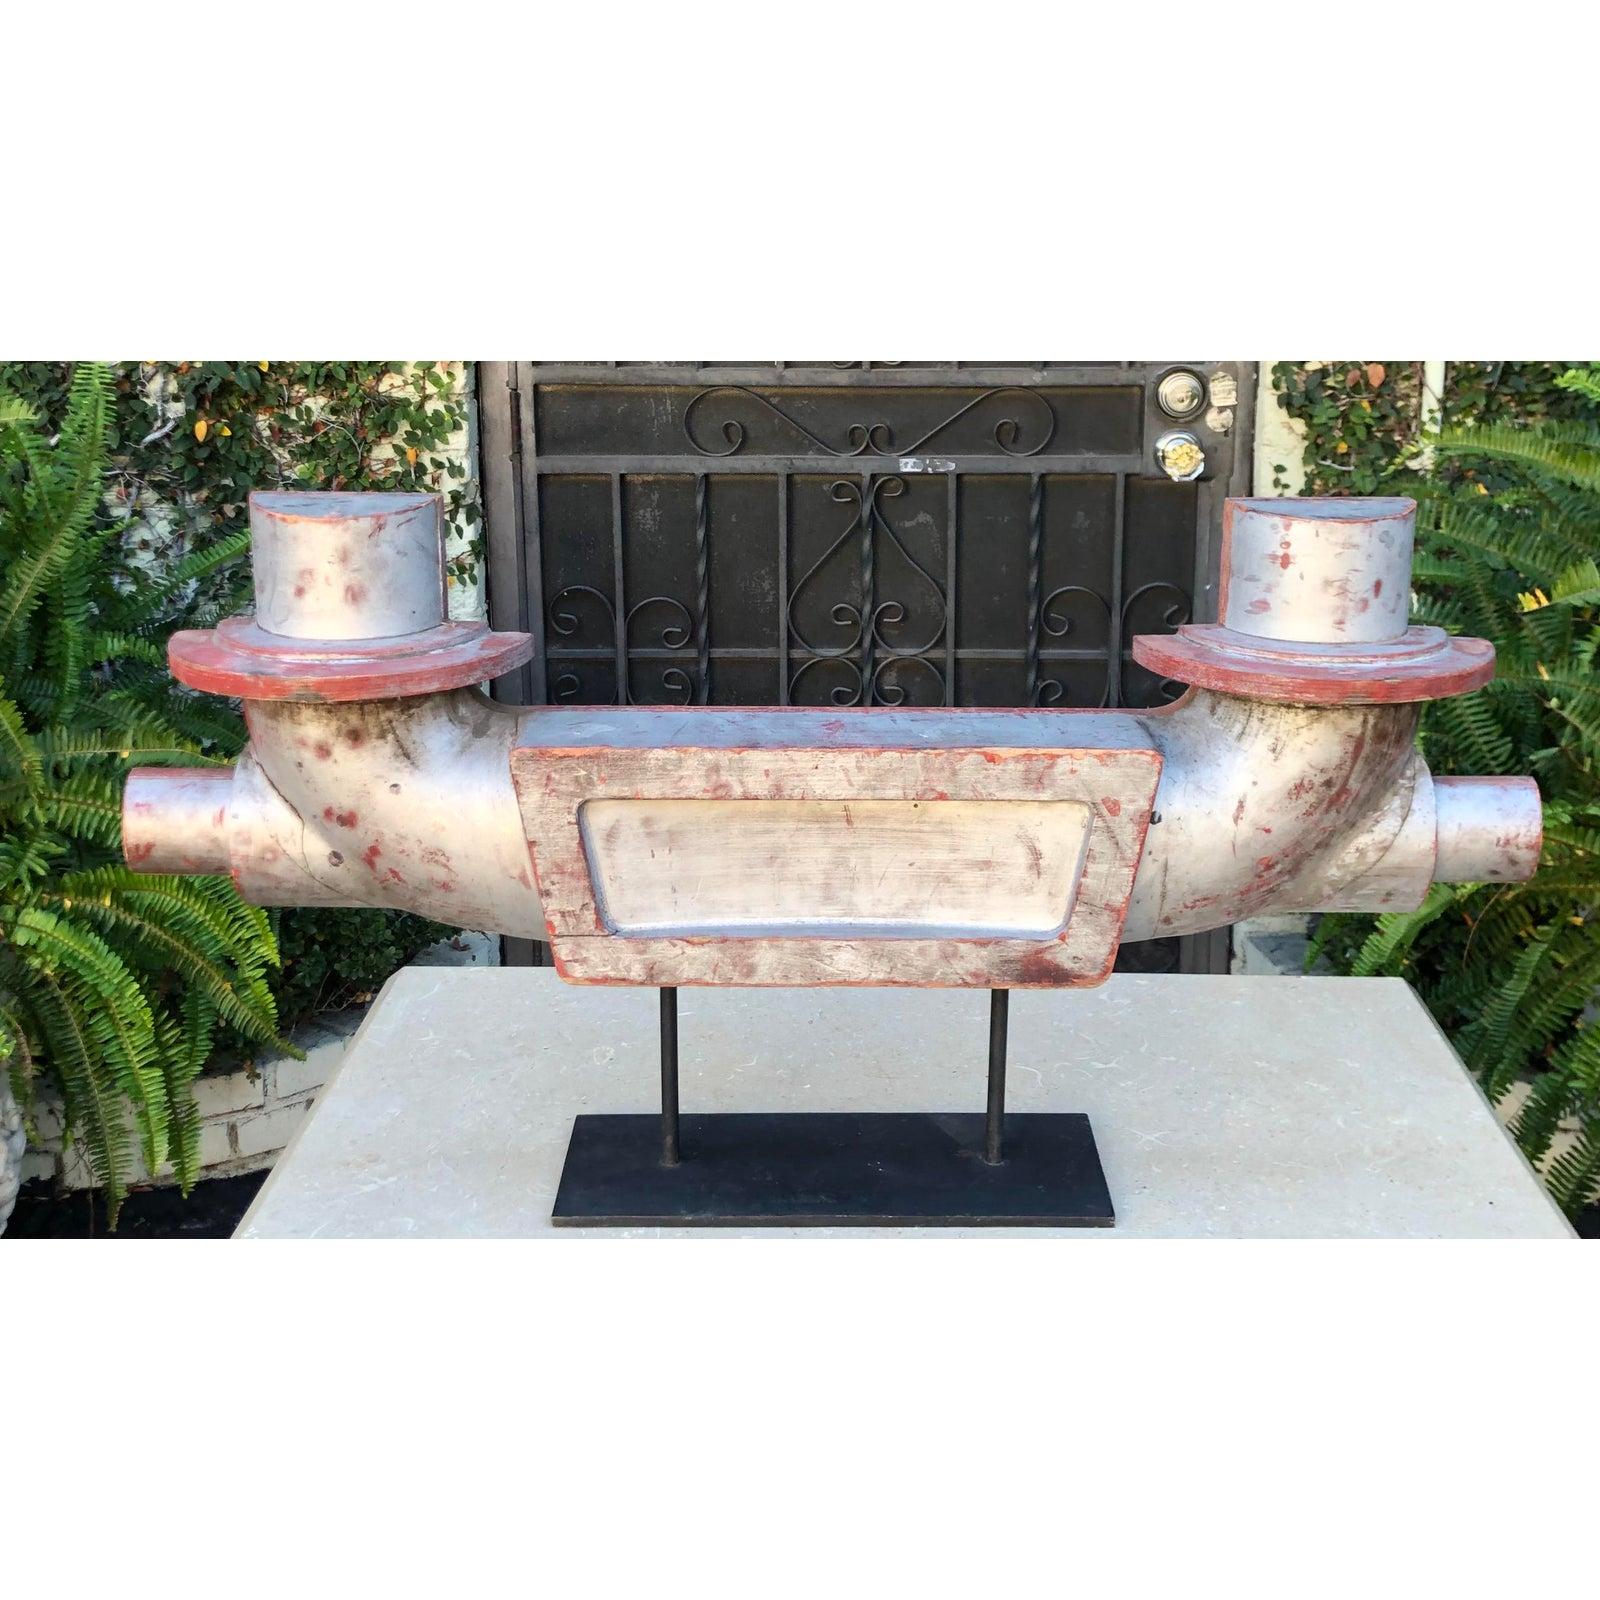 Industrial Chic Steampunk carved wood Art Deco sculpture.

Additional information:
Materials: Wood
Color: Silver
Art Subjects: Abstract
Period: 1940s
Styles: Art Deco, Industrial
Item Type: Vintage, Antique or Pre-owned
Dimensions: 39